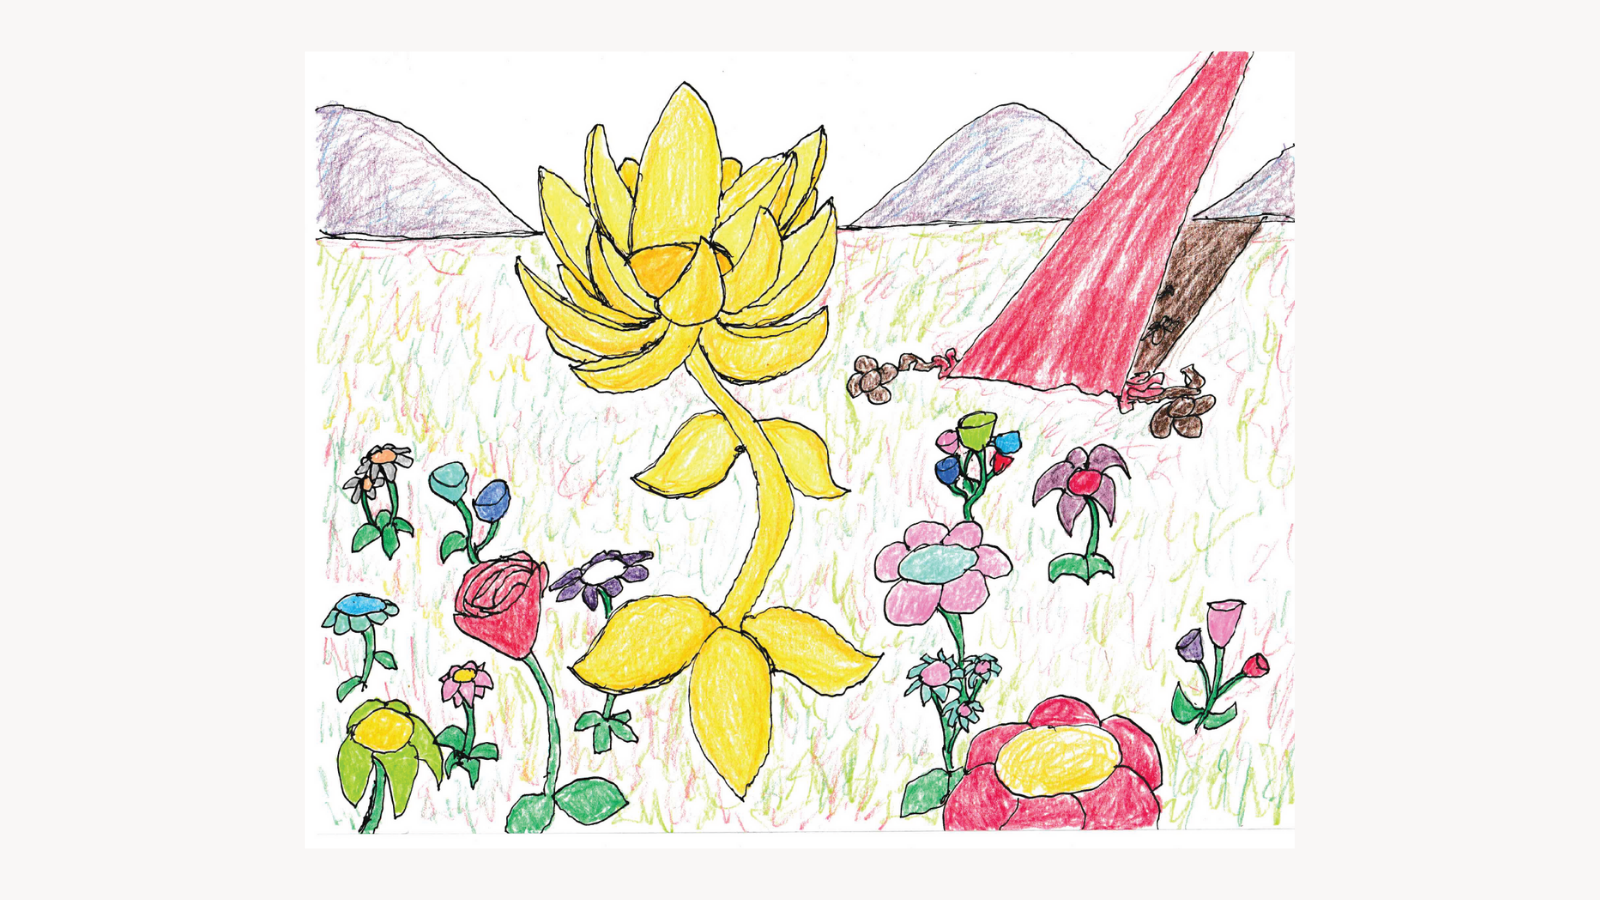 A laser moves toward a golden flower surrounded by other flowers